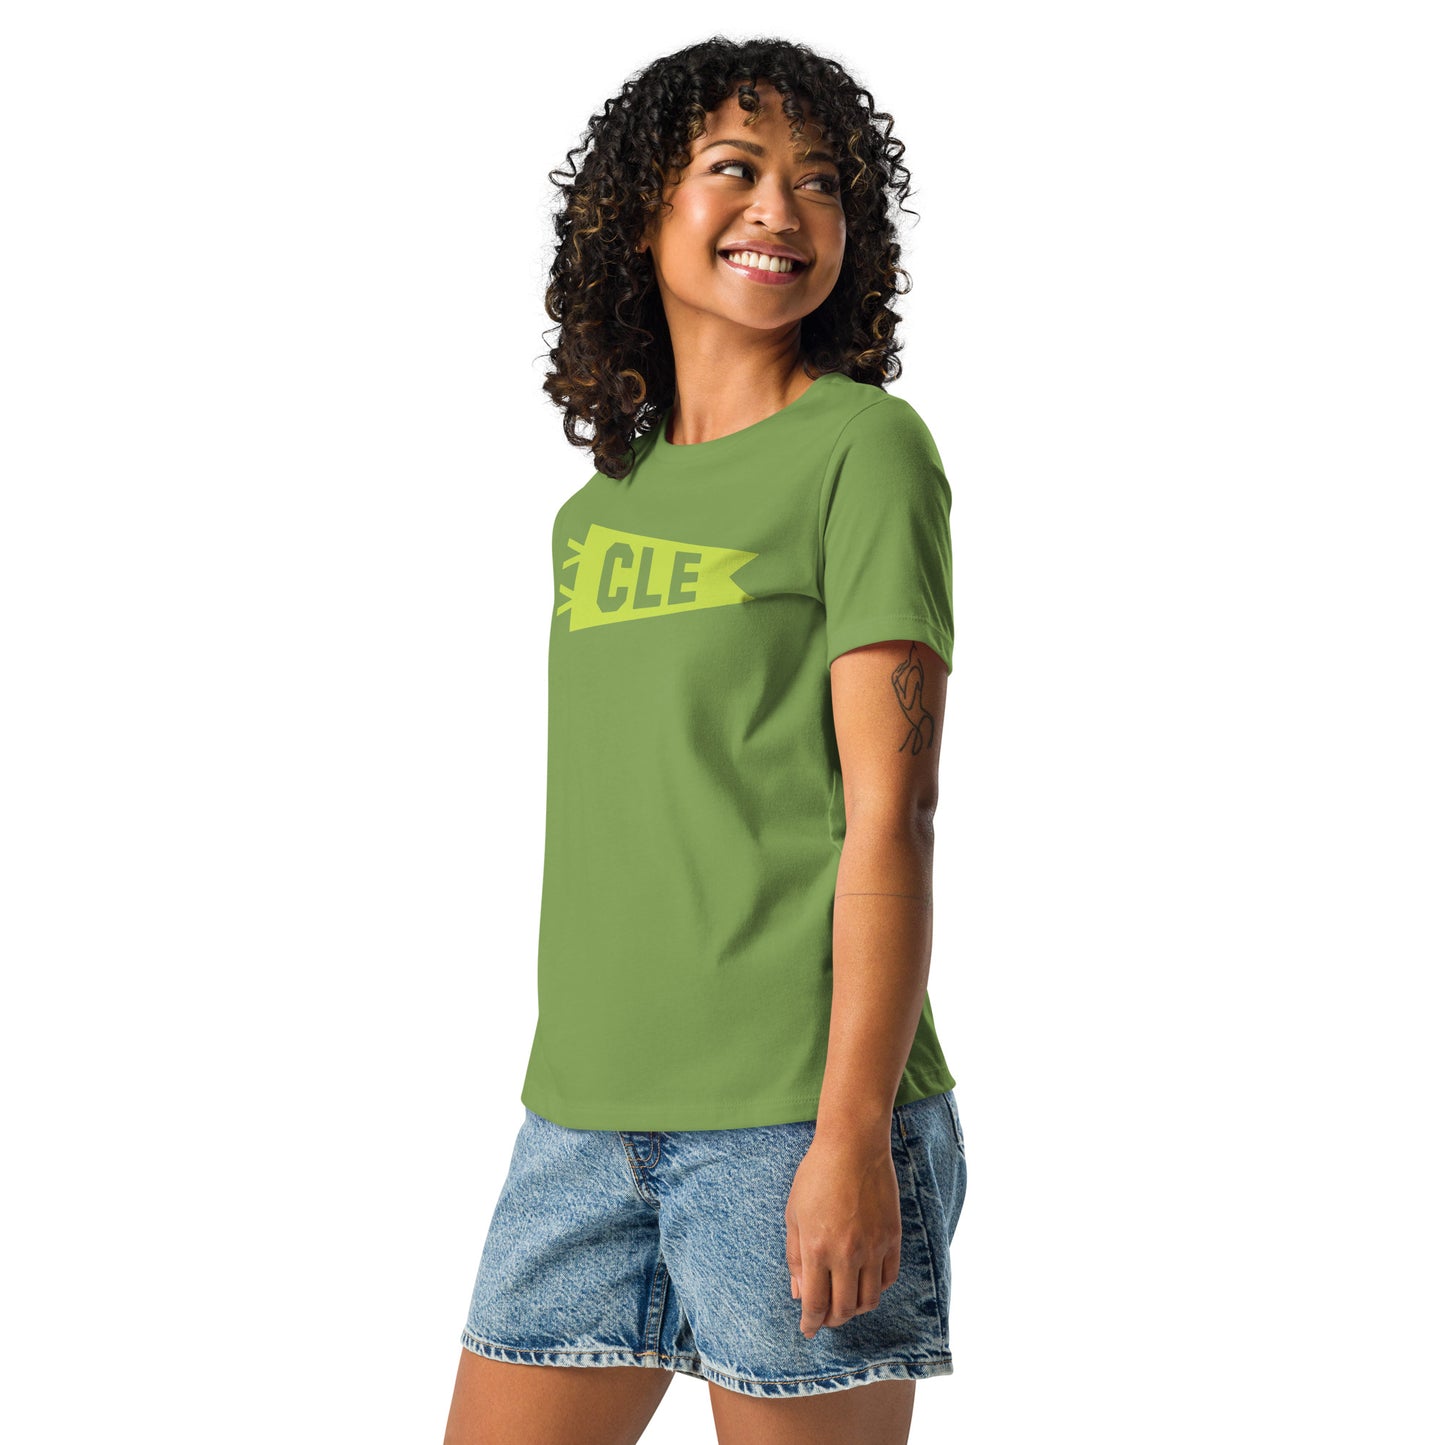 Airport Code Women's Tee - Green Graphic • CLE Cleveland • YHM Designs - Image 06